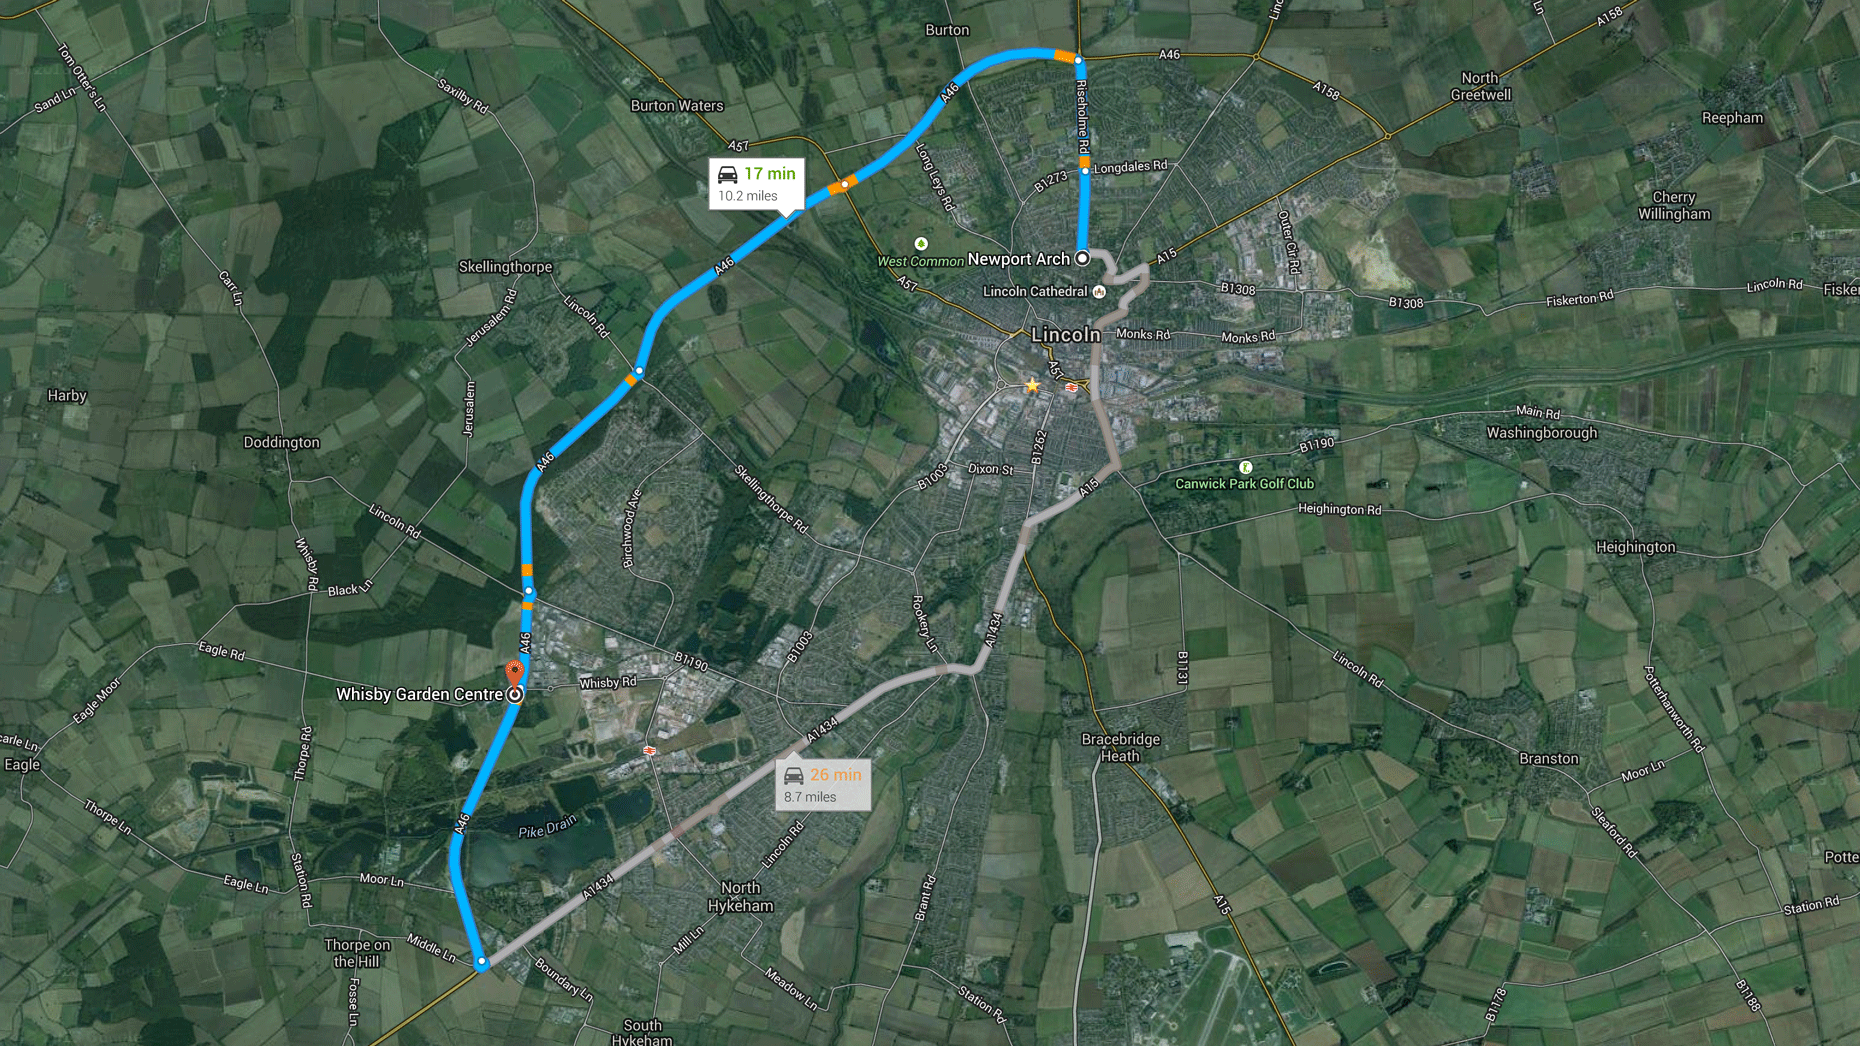 The route of the Lincoln Castle park & ride service from Whisby Garden Centre off the A46 to Newport in Lincoln. Image: Google Maps